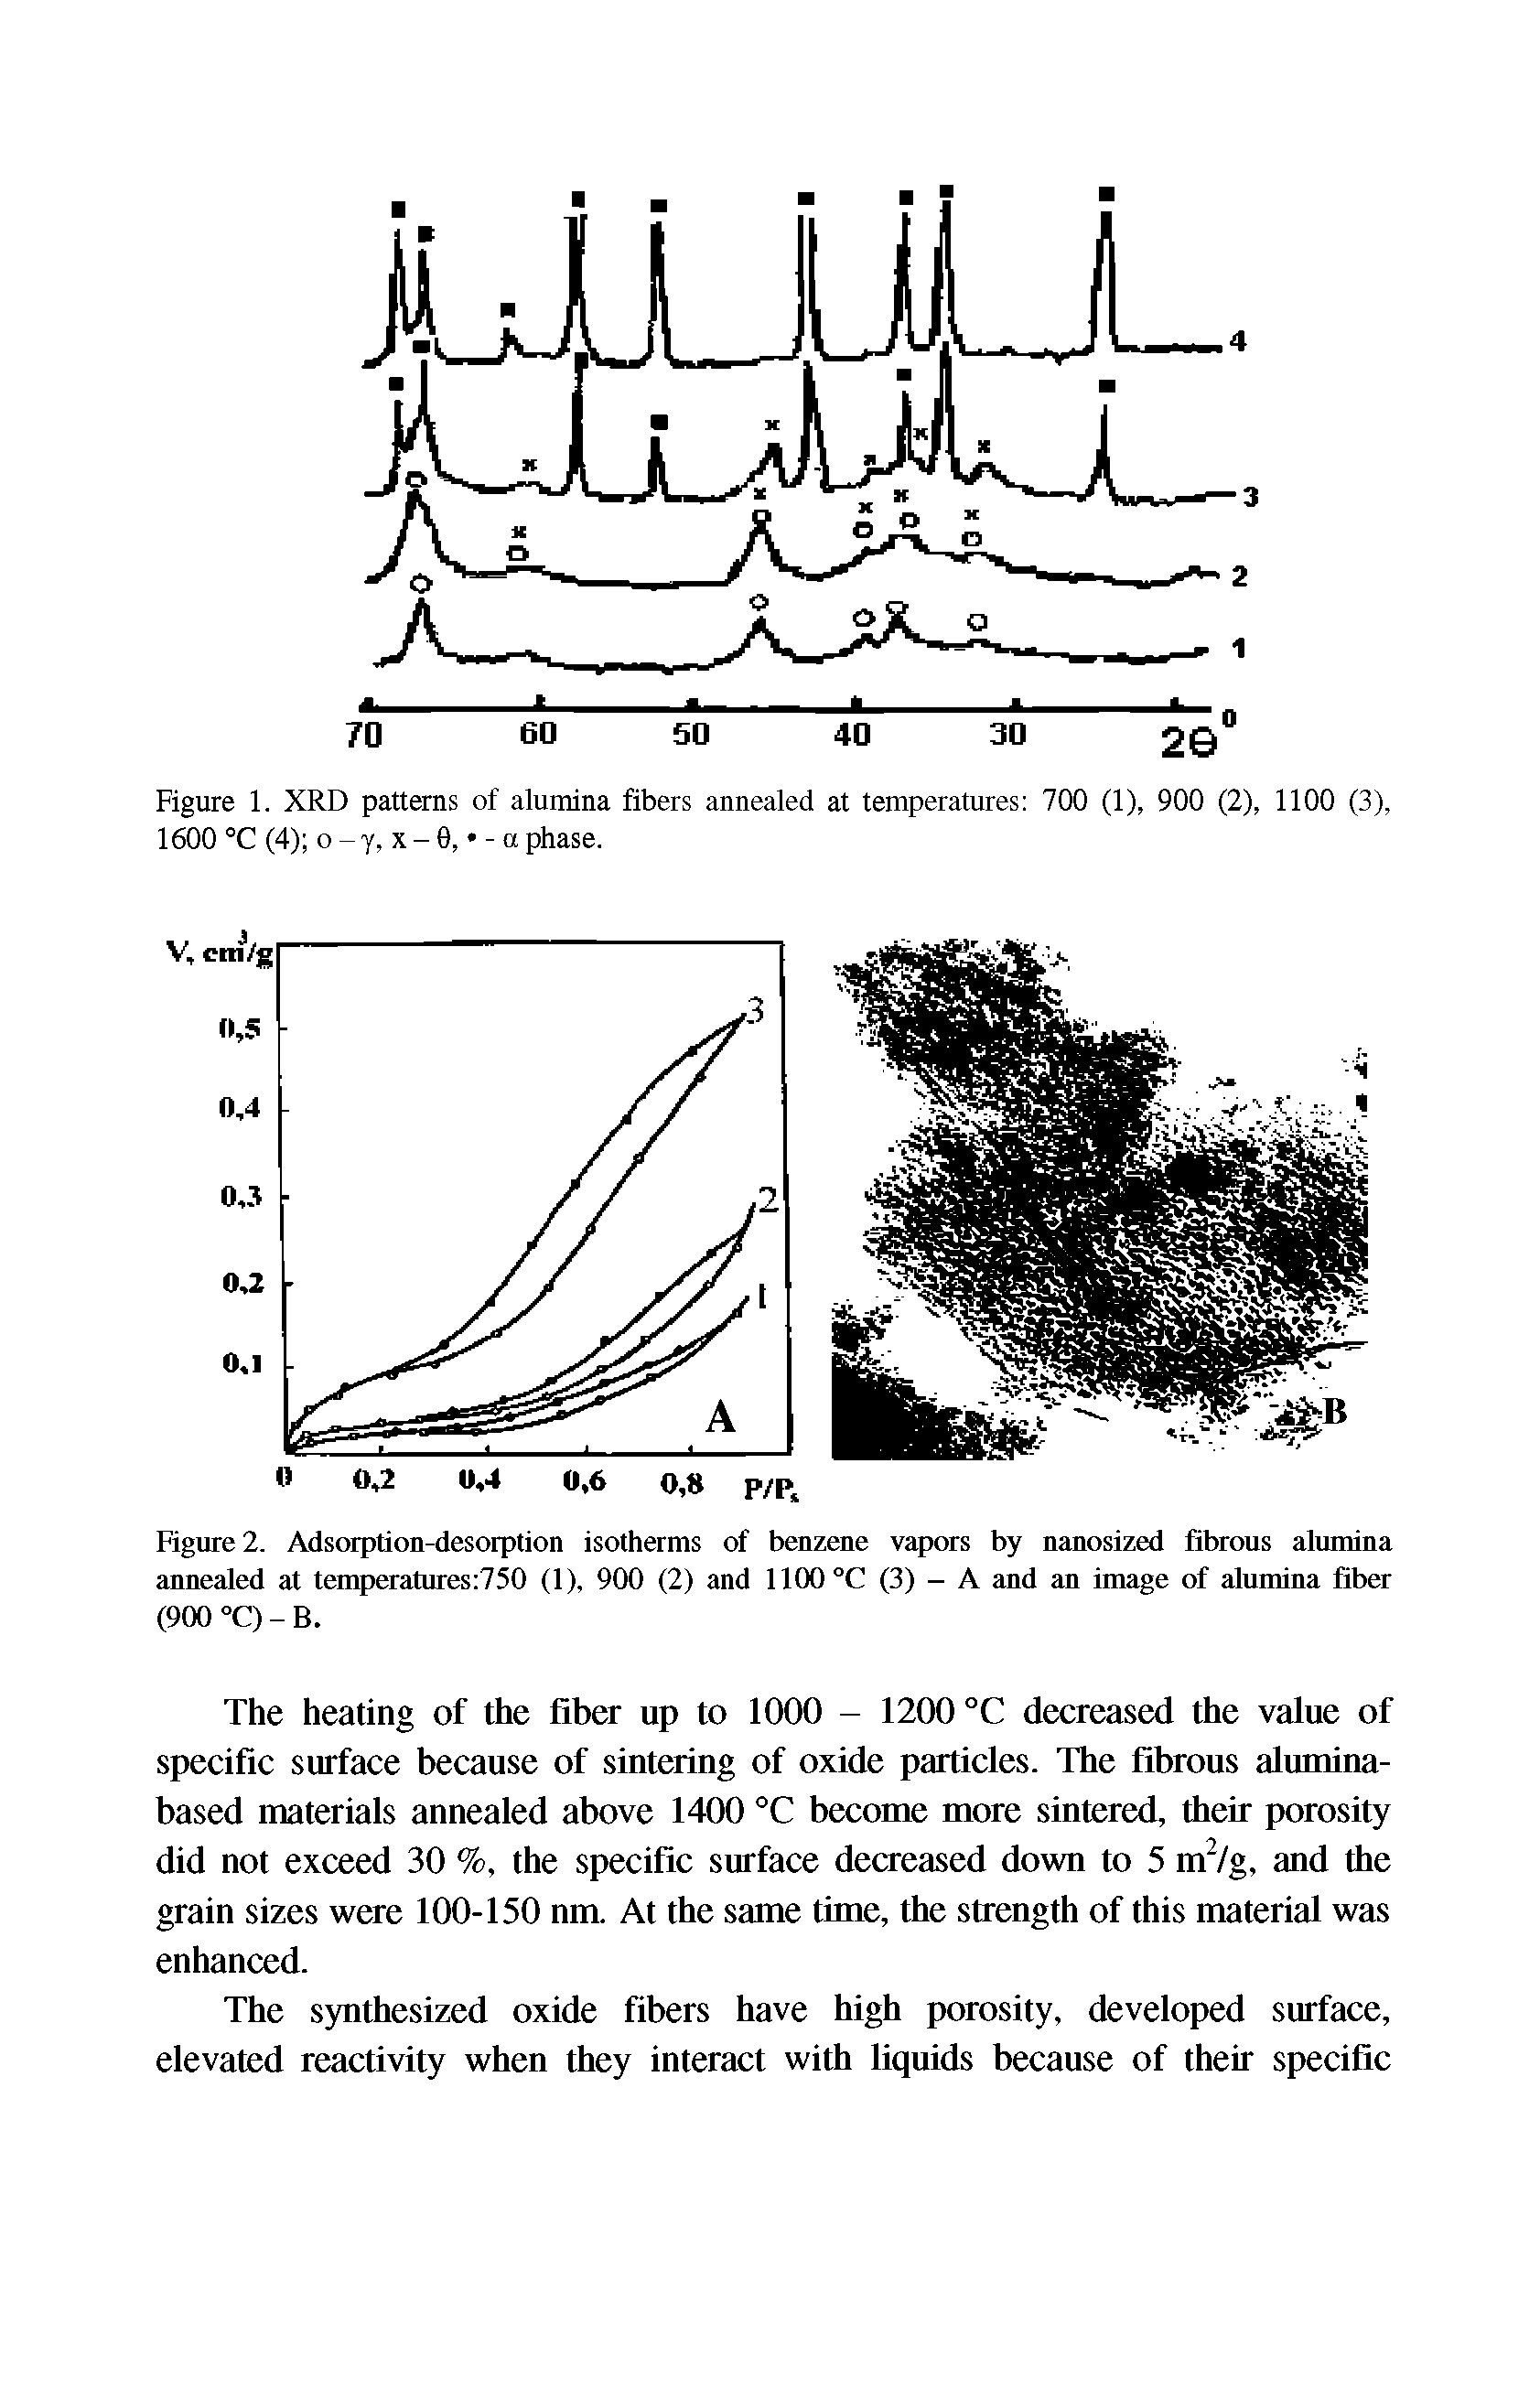 Figure 2. Adsorption-desorption isotherms of benzene vapors by nanosized fibrous alumina annealed at temperatures 750 (1), 900 (2) and 1100 °C (3) - A and an image of alumina fiber (900 °C) - B.